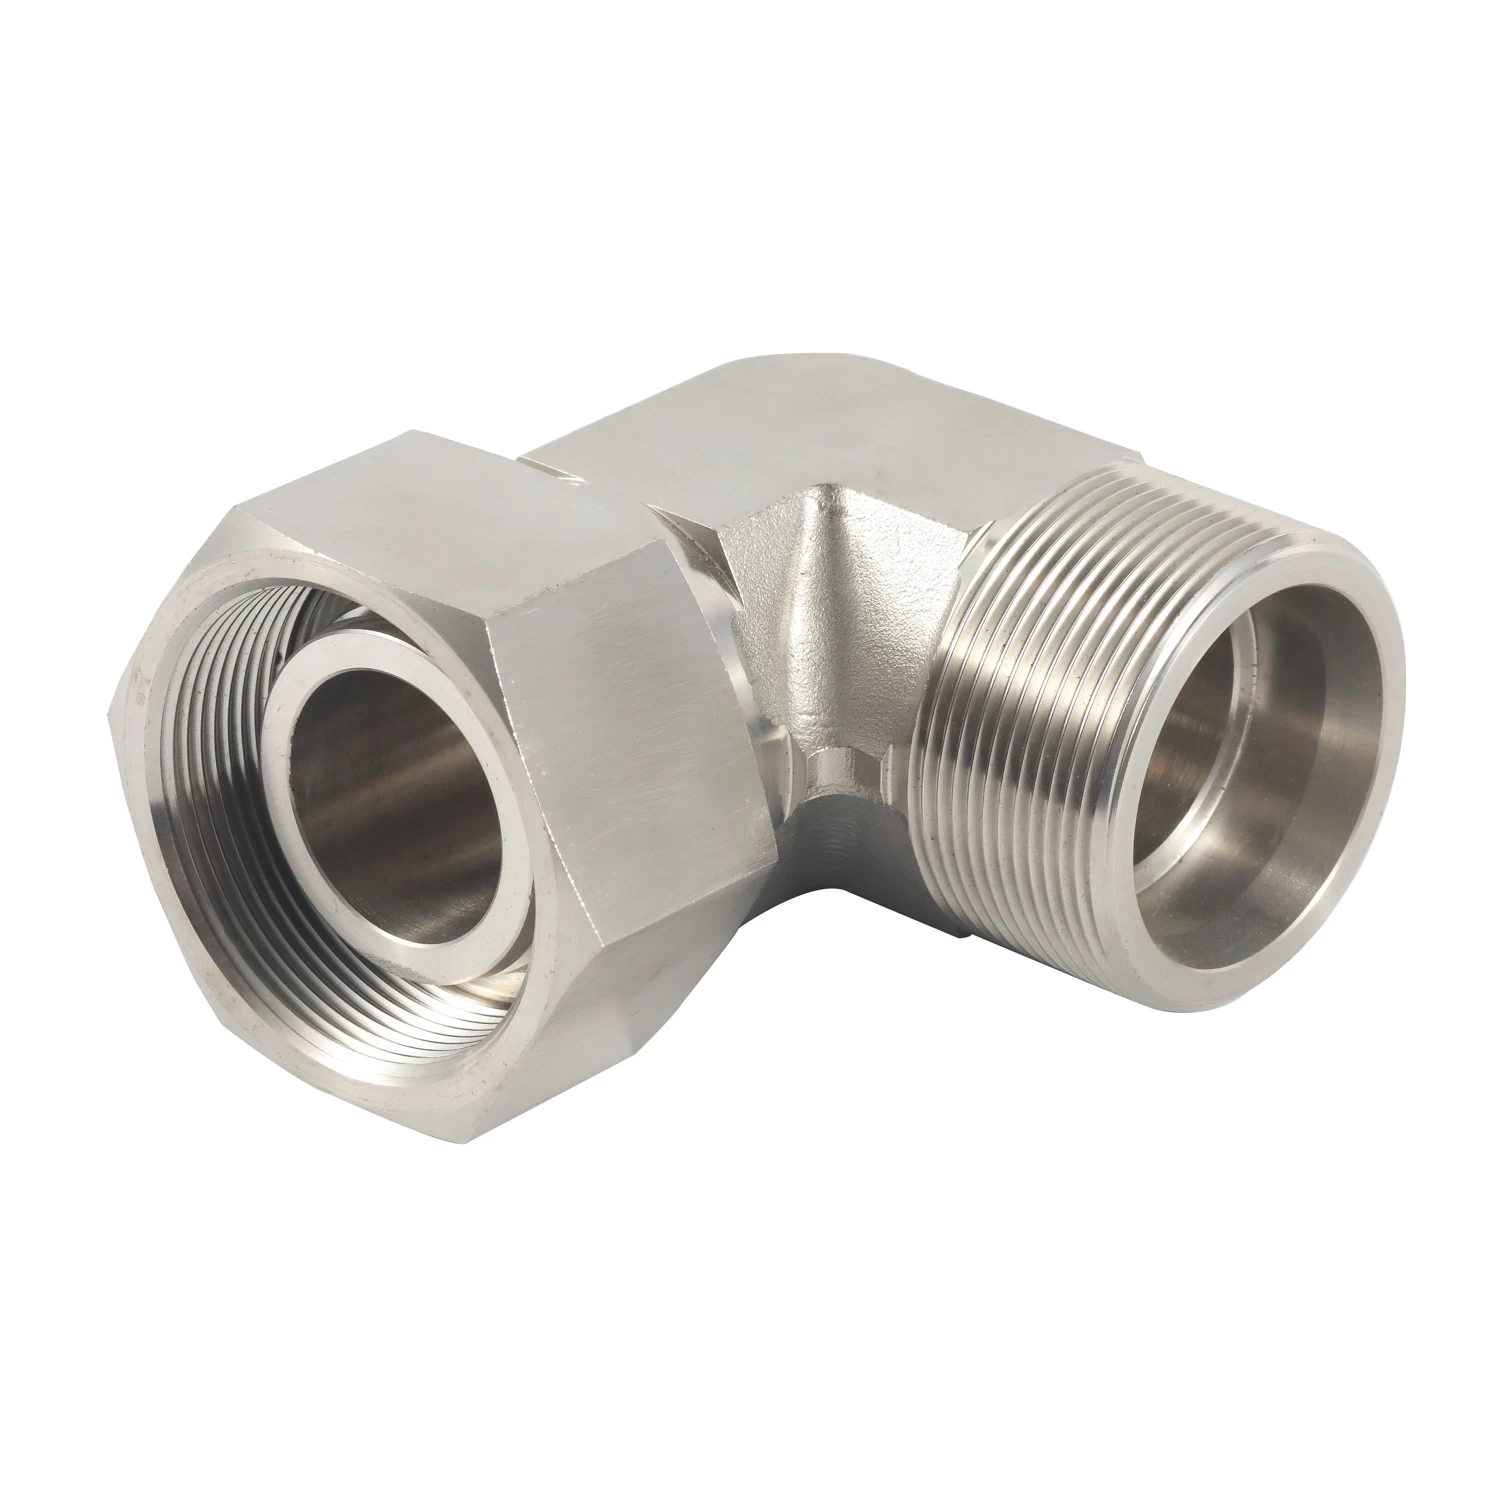 China 2C9 90 degree elbow reducer tube adaptor with swivel nut manufacturer